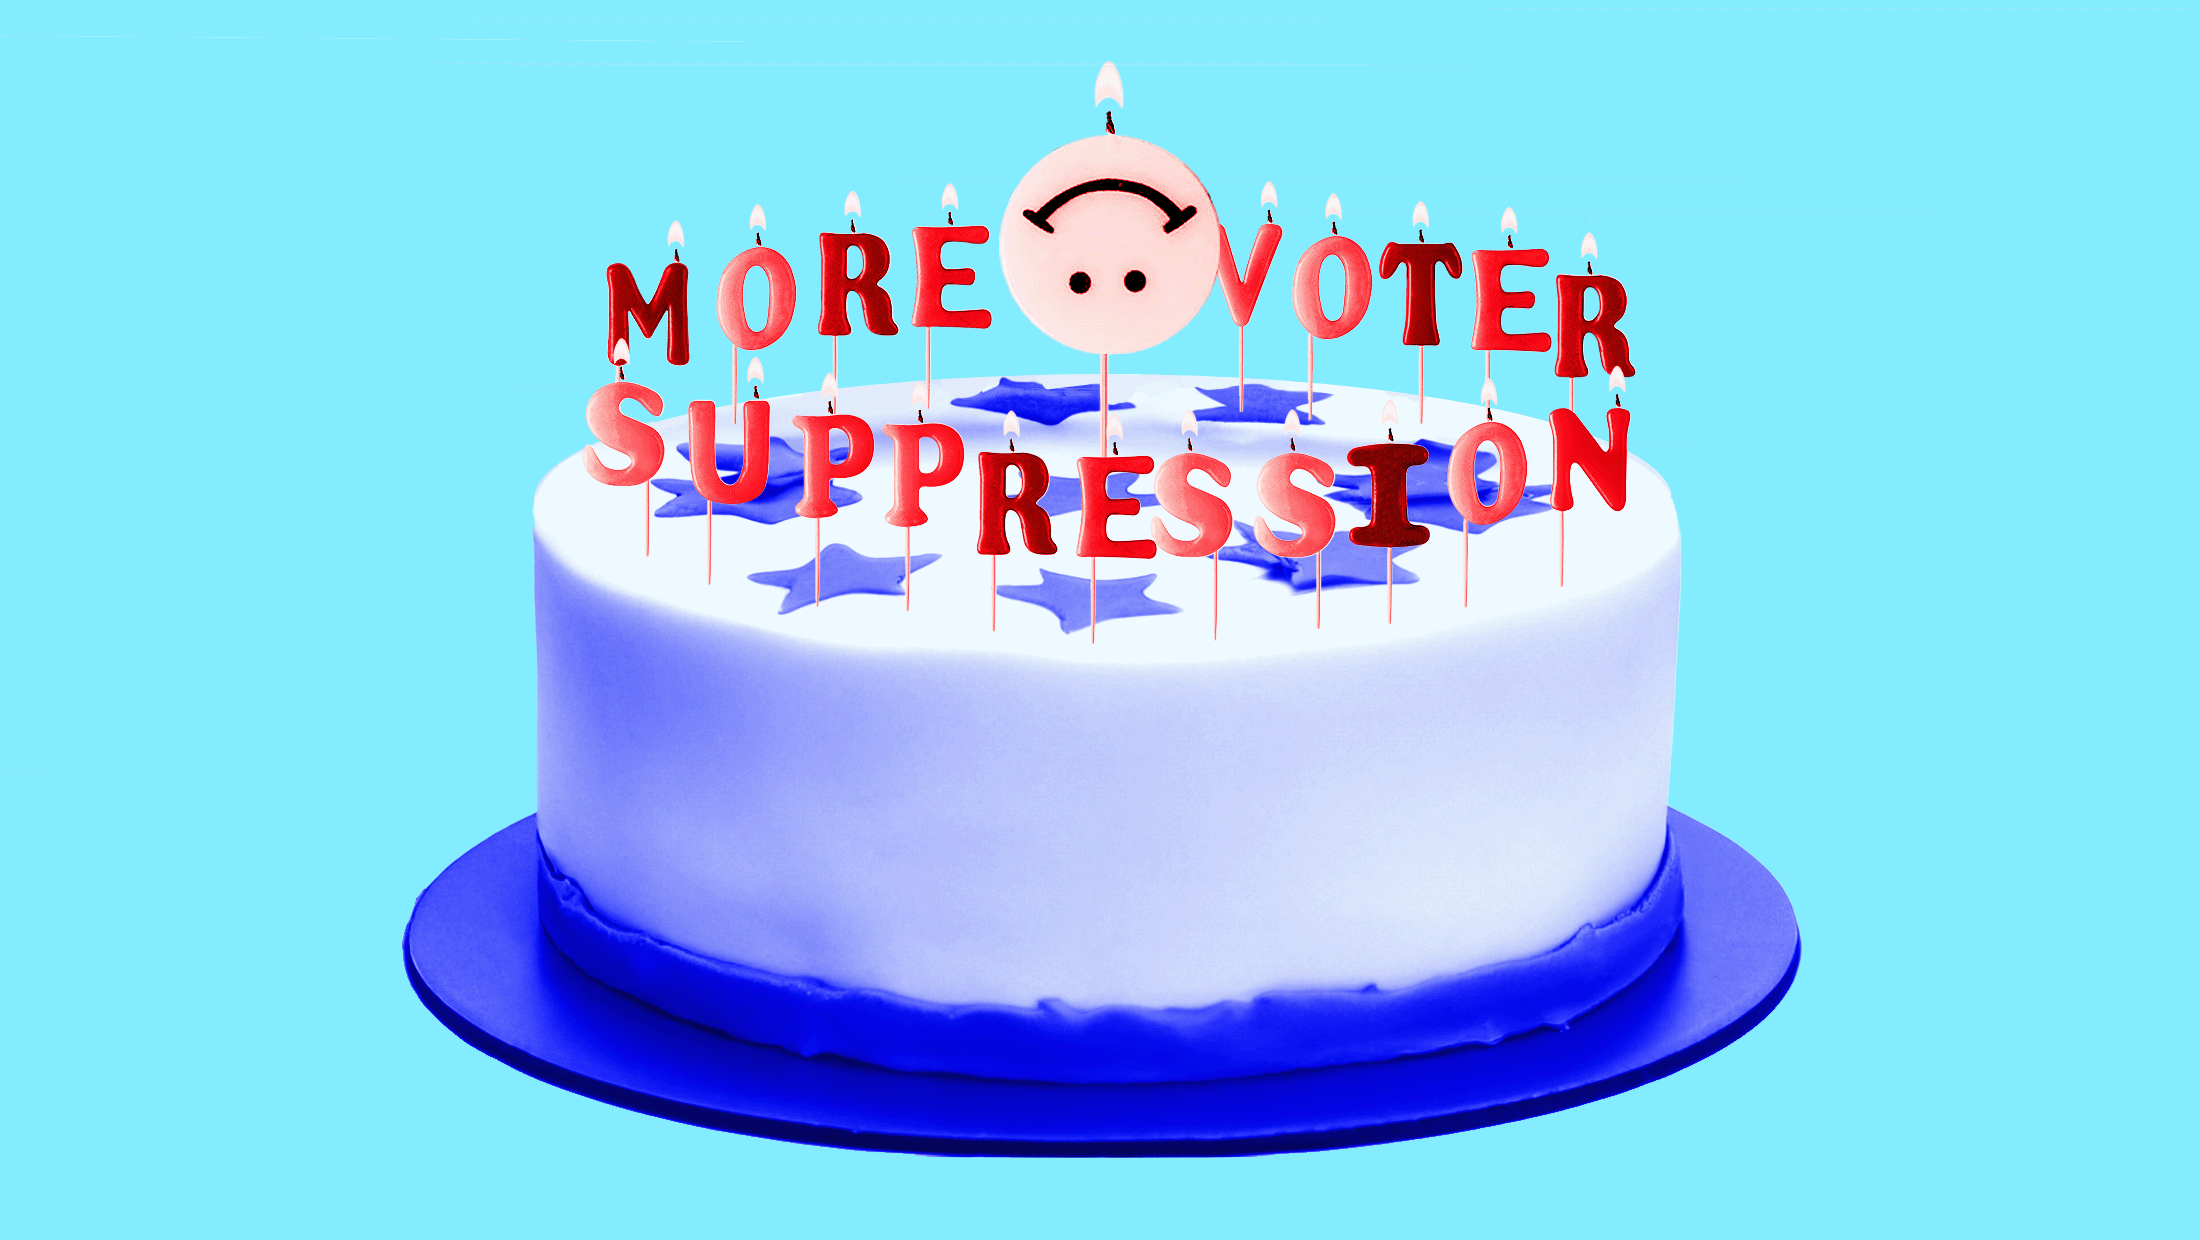 Image of a birthday cake with a blue background. The birthday cake's candles spell out "more voter suppression. A candle in the middle of the cake features an upside-down smiley face.